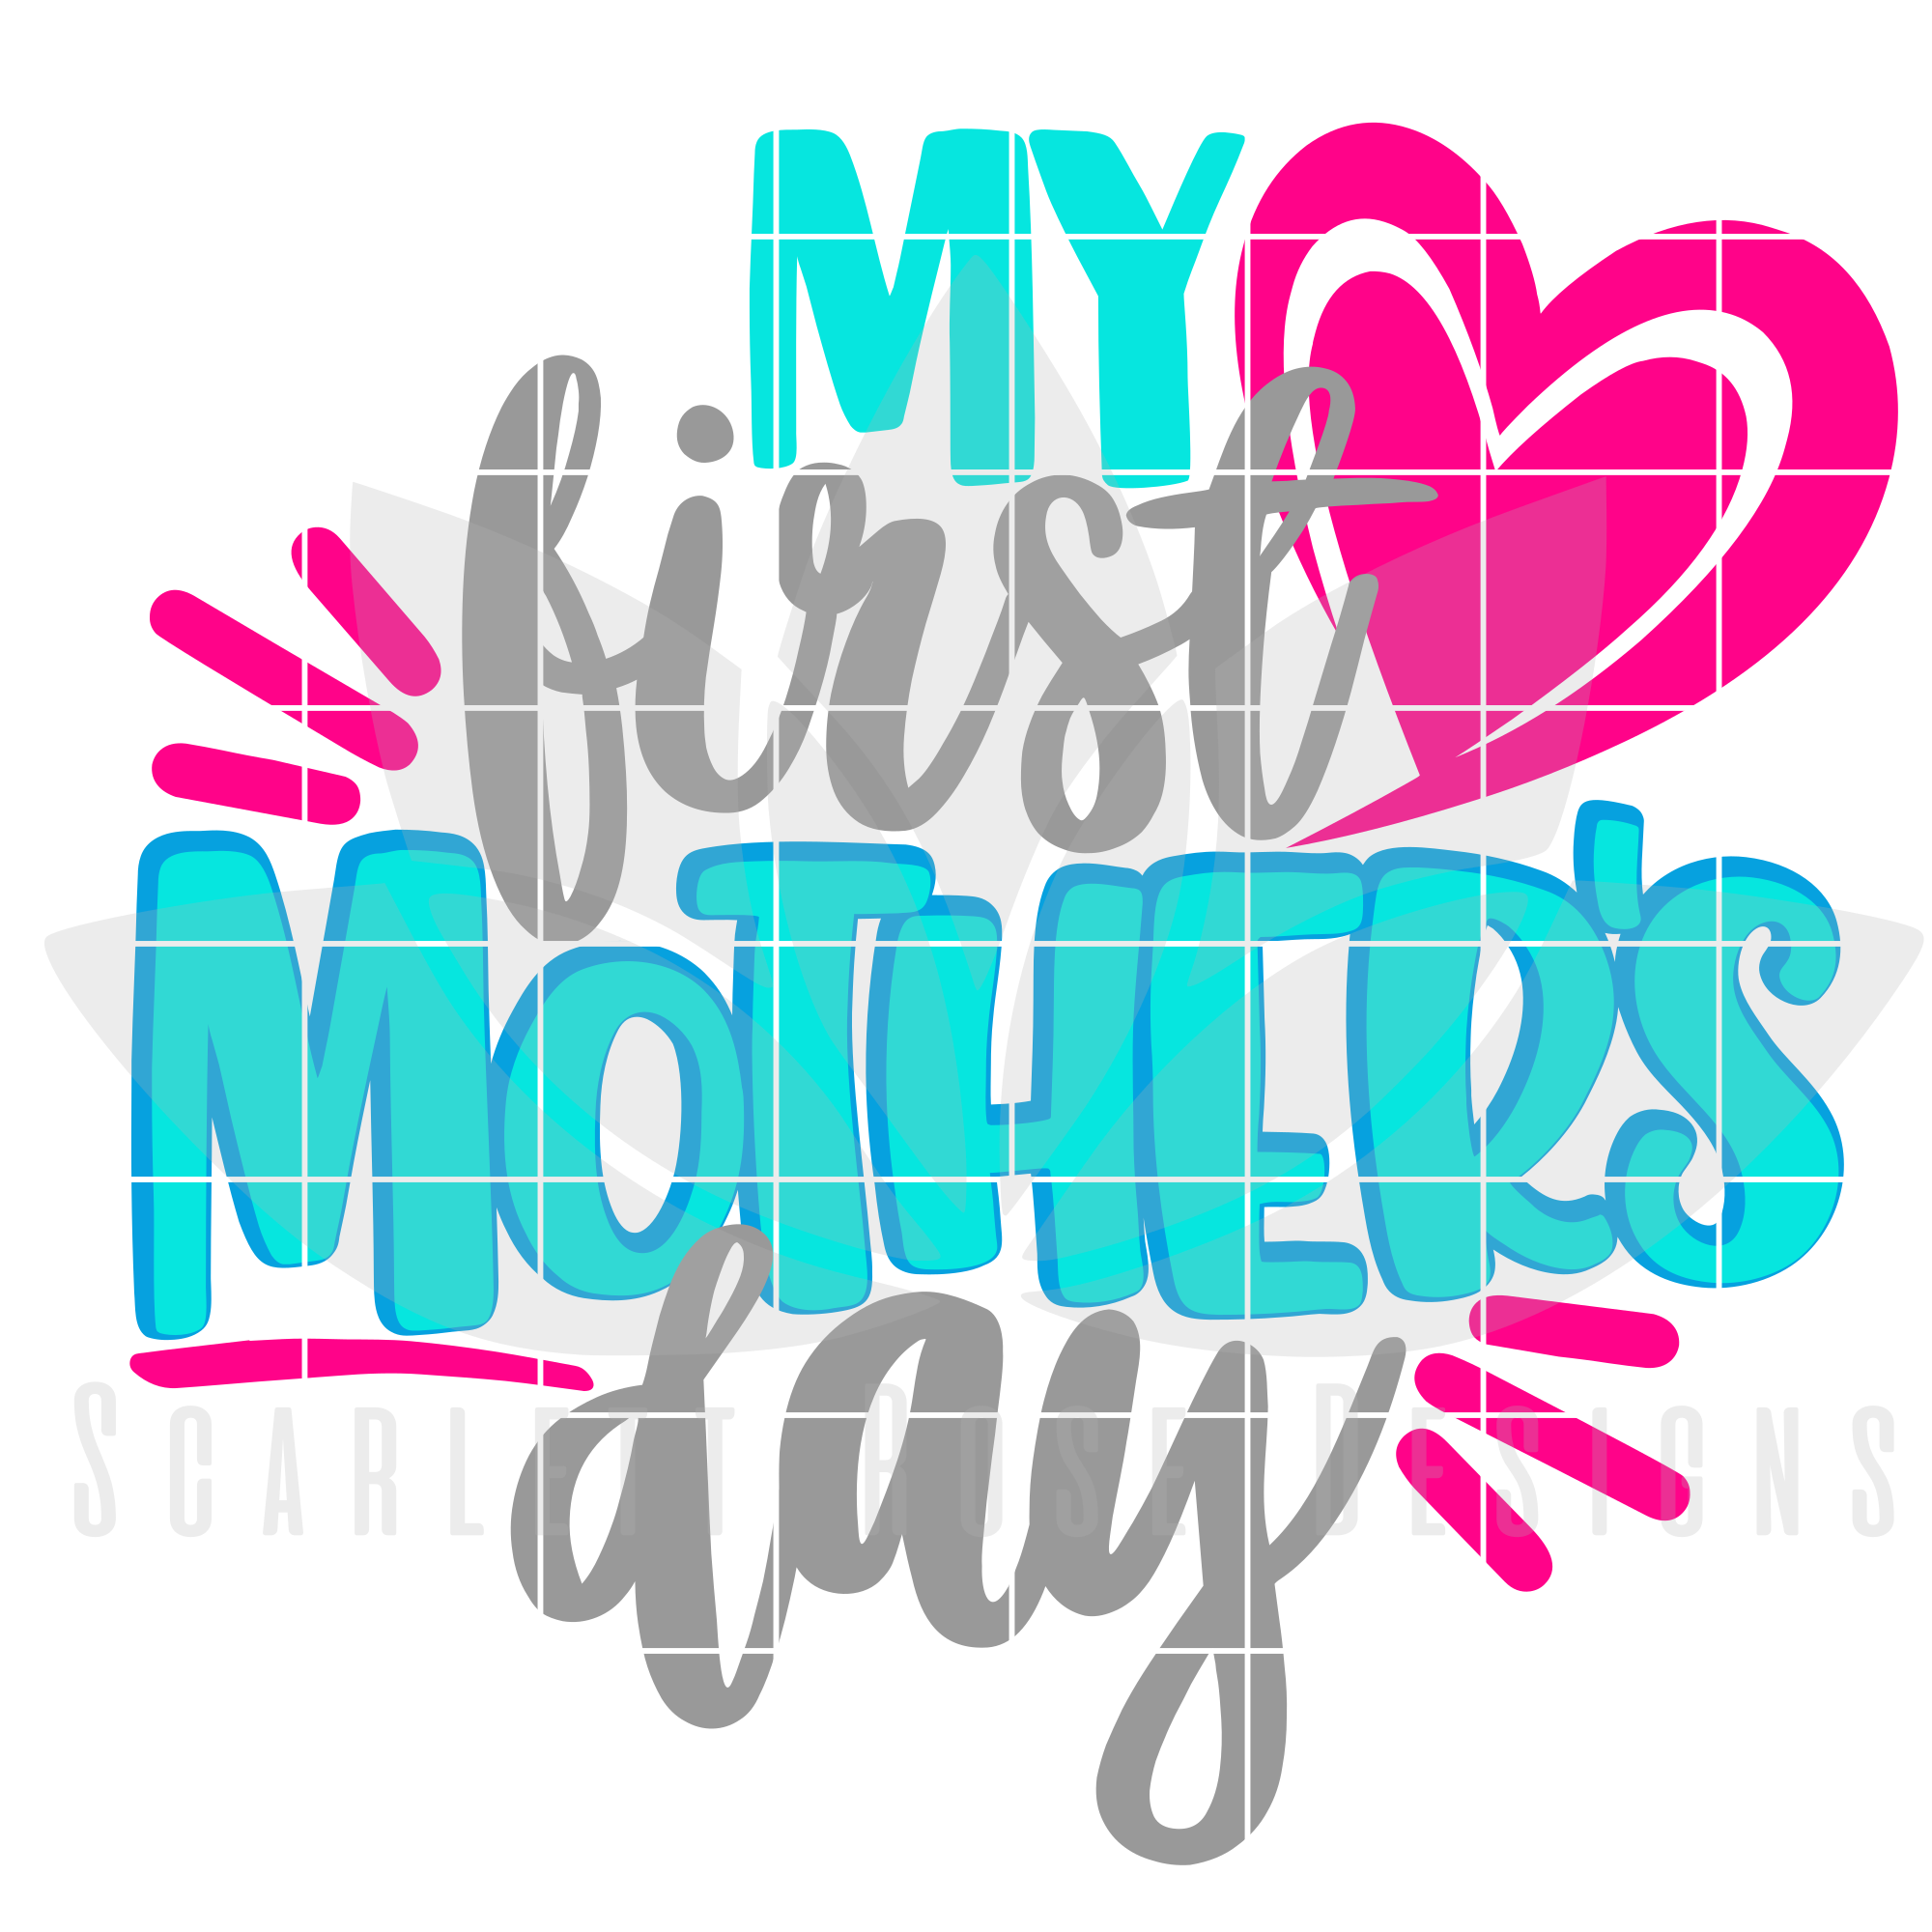 My First Mother's Day SVG cut file - Scarlett Rose Designs